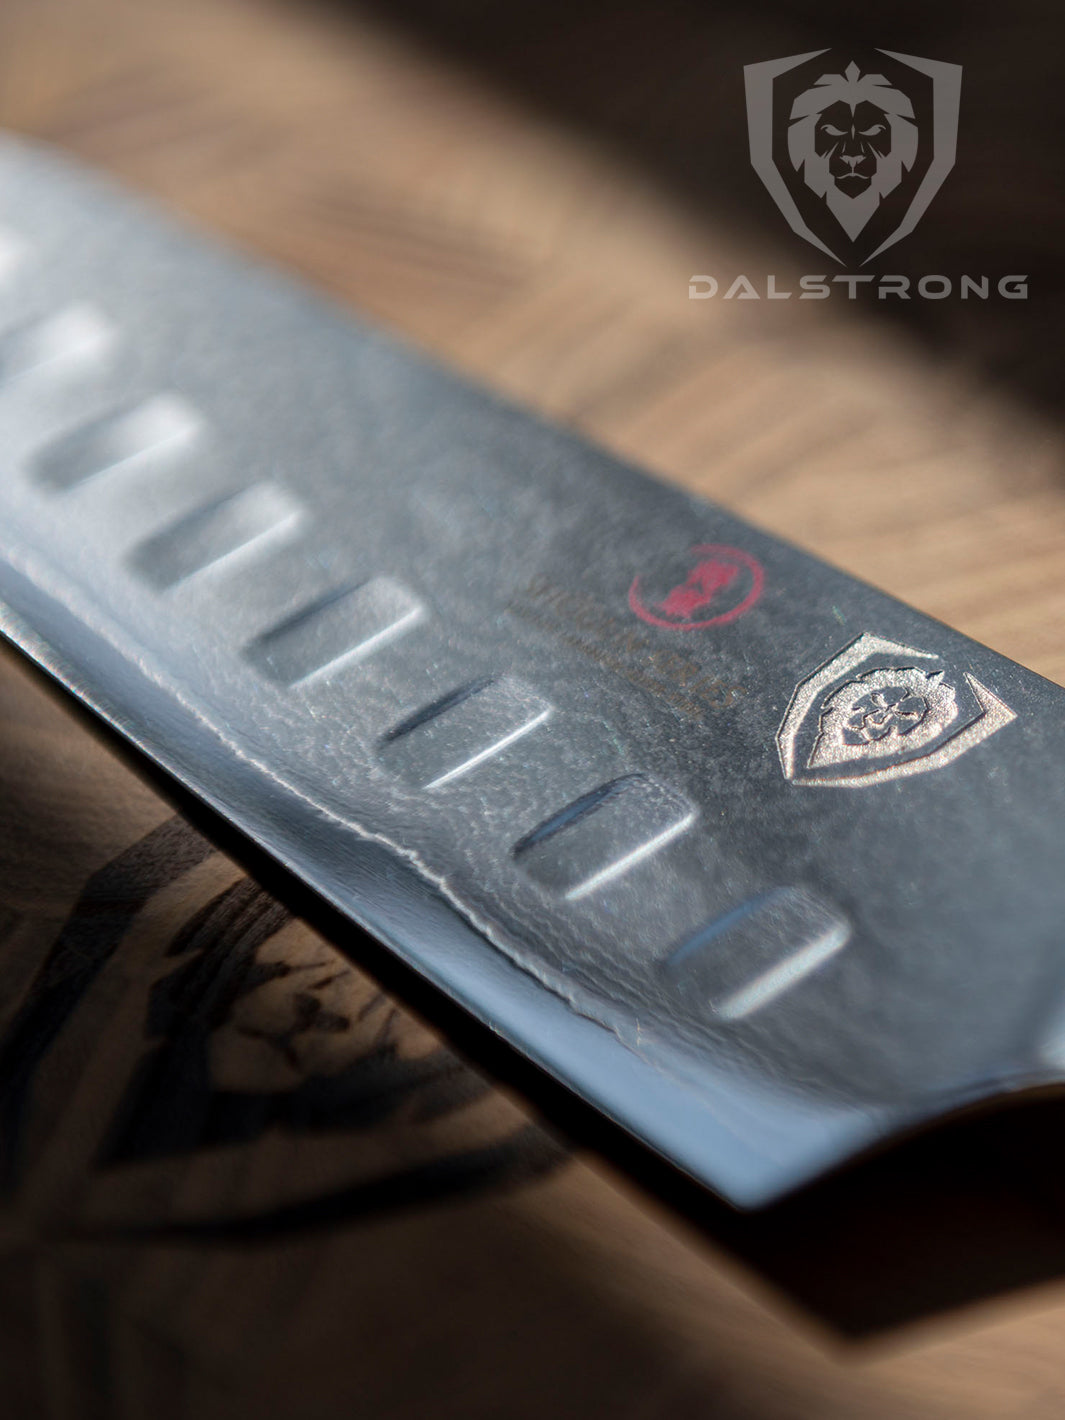 Dalstrong shogun series 7 inch santoku knife with crimson red handle and dalstrong logo shined directly by the light.